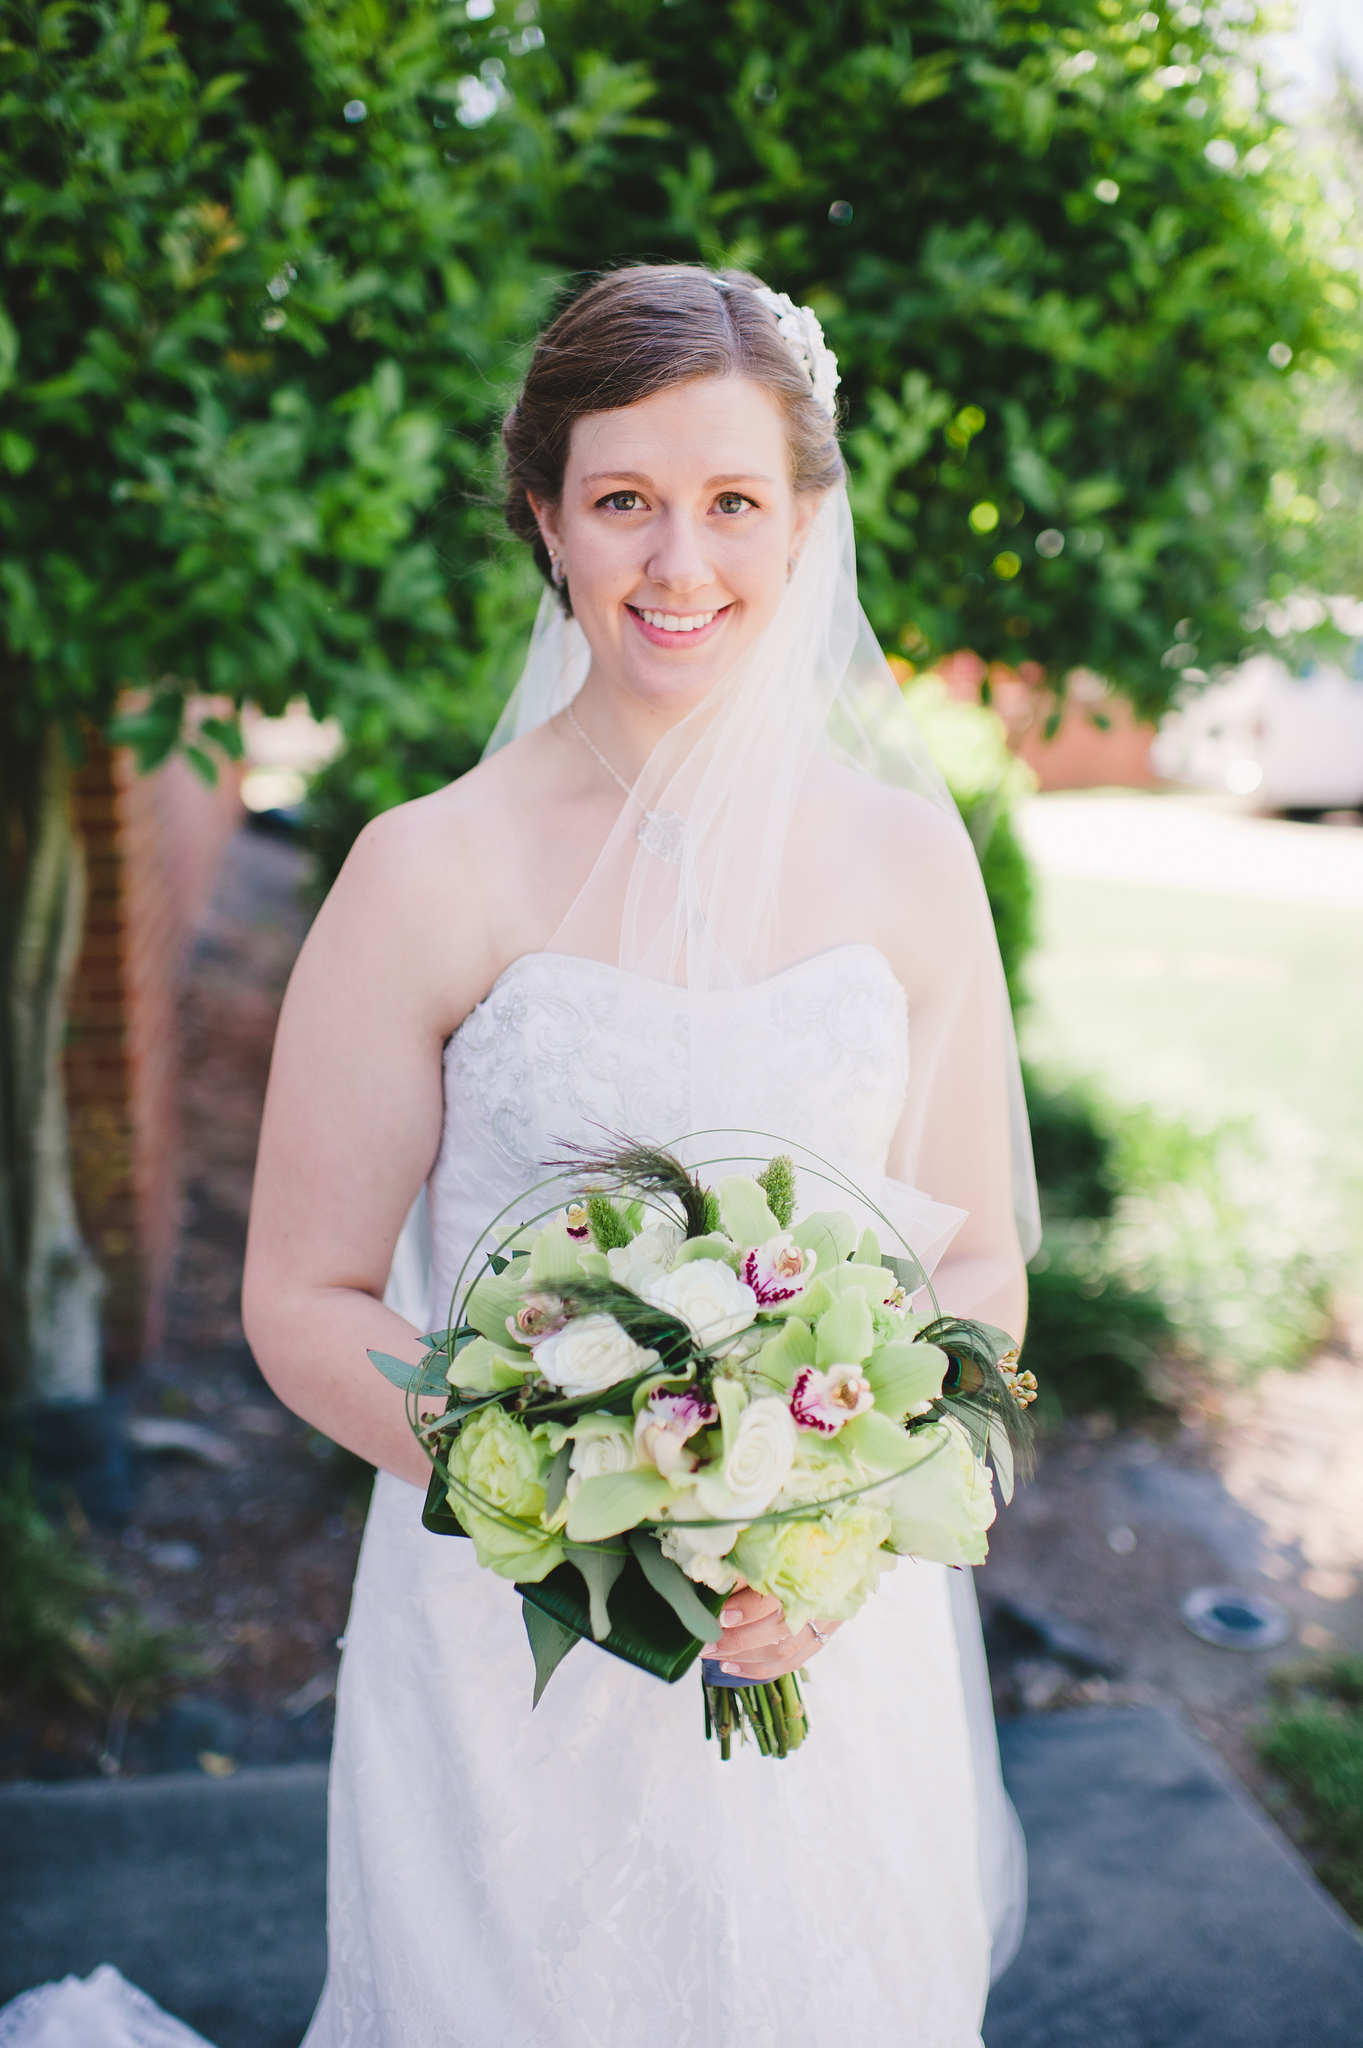 The bride and her beautiful bouquet